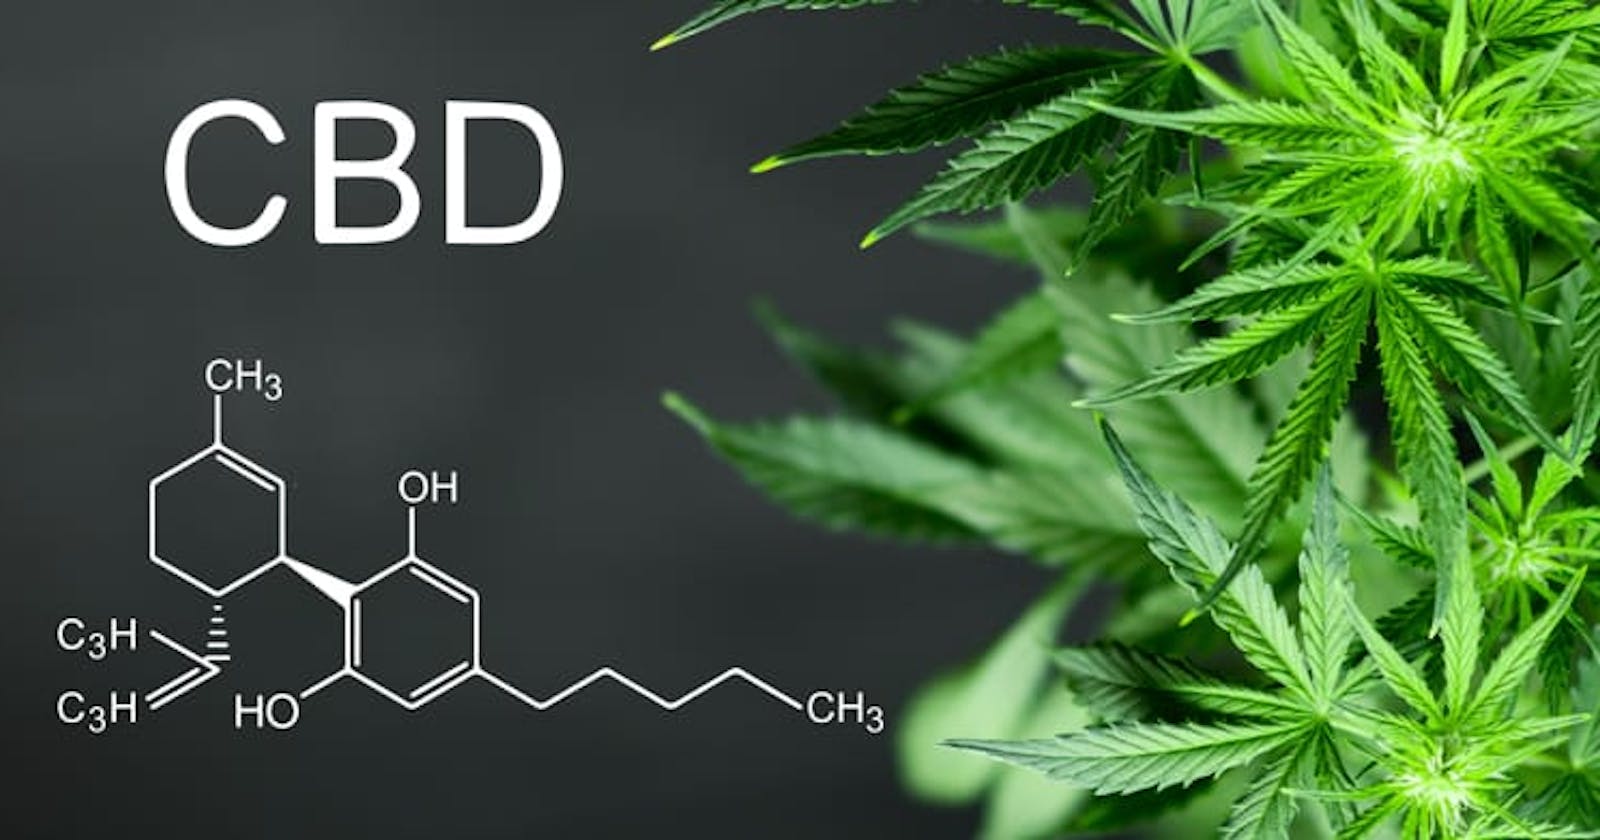 The Lowdown on CBD: Insider Facts You Won't Hear from Most Marketers